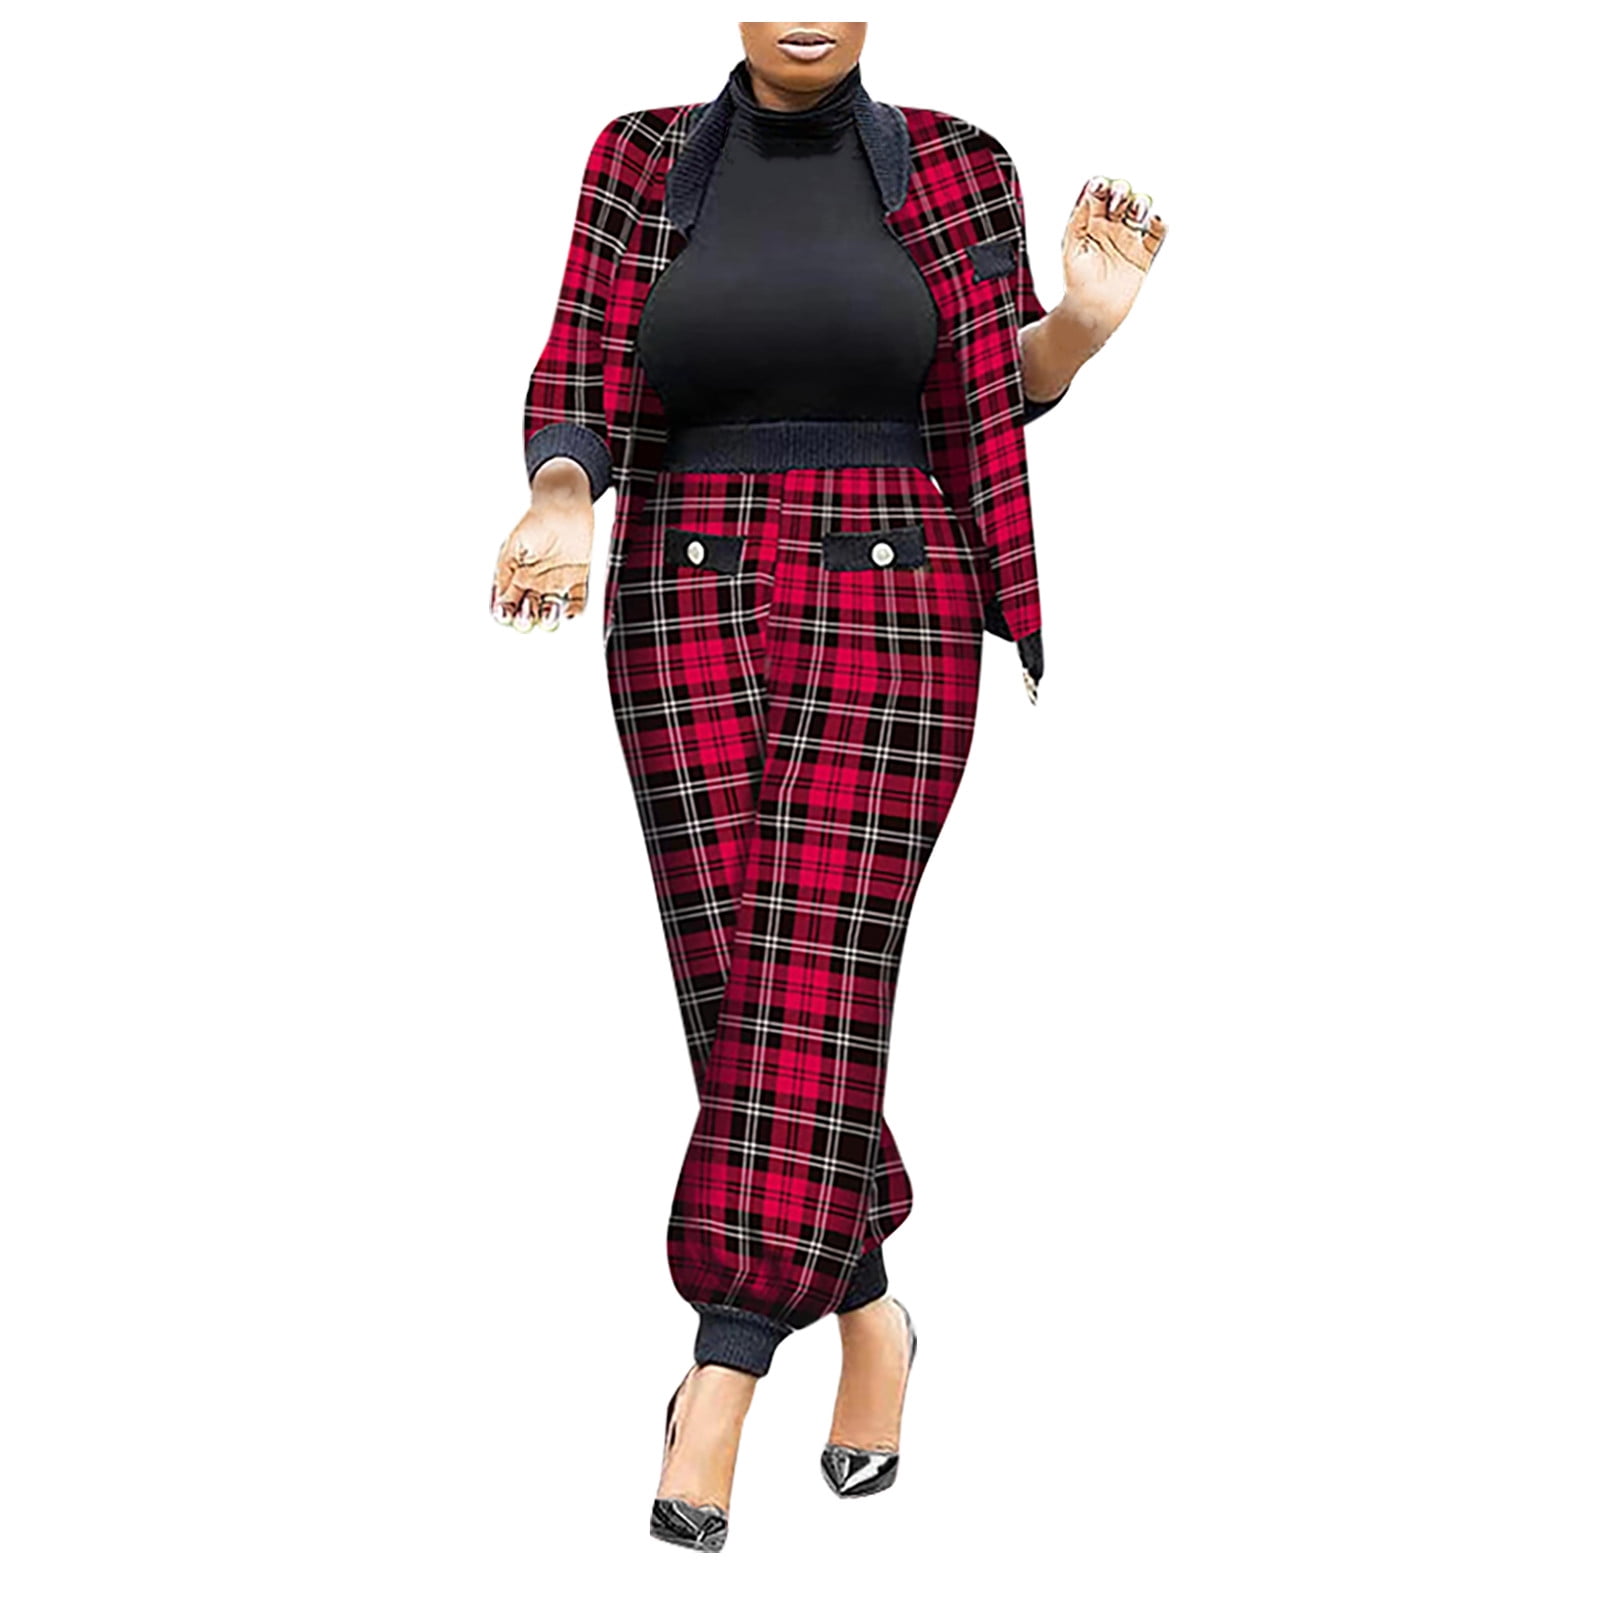 NARABB Women's Casual Suit Plaid Printed Fashionable Lady's Button Coat ...